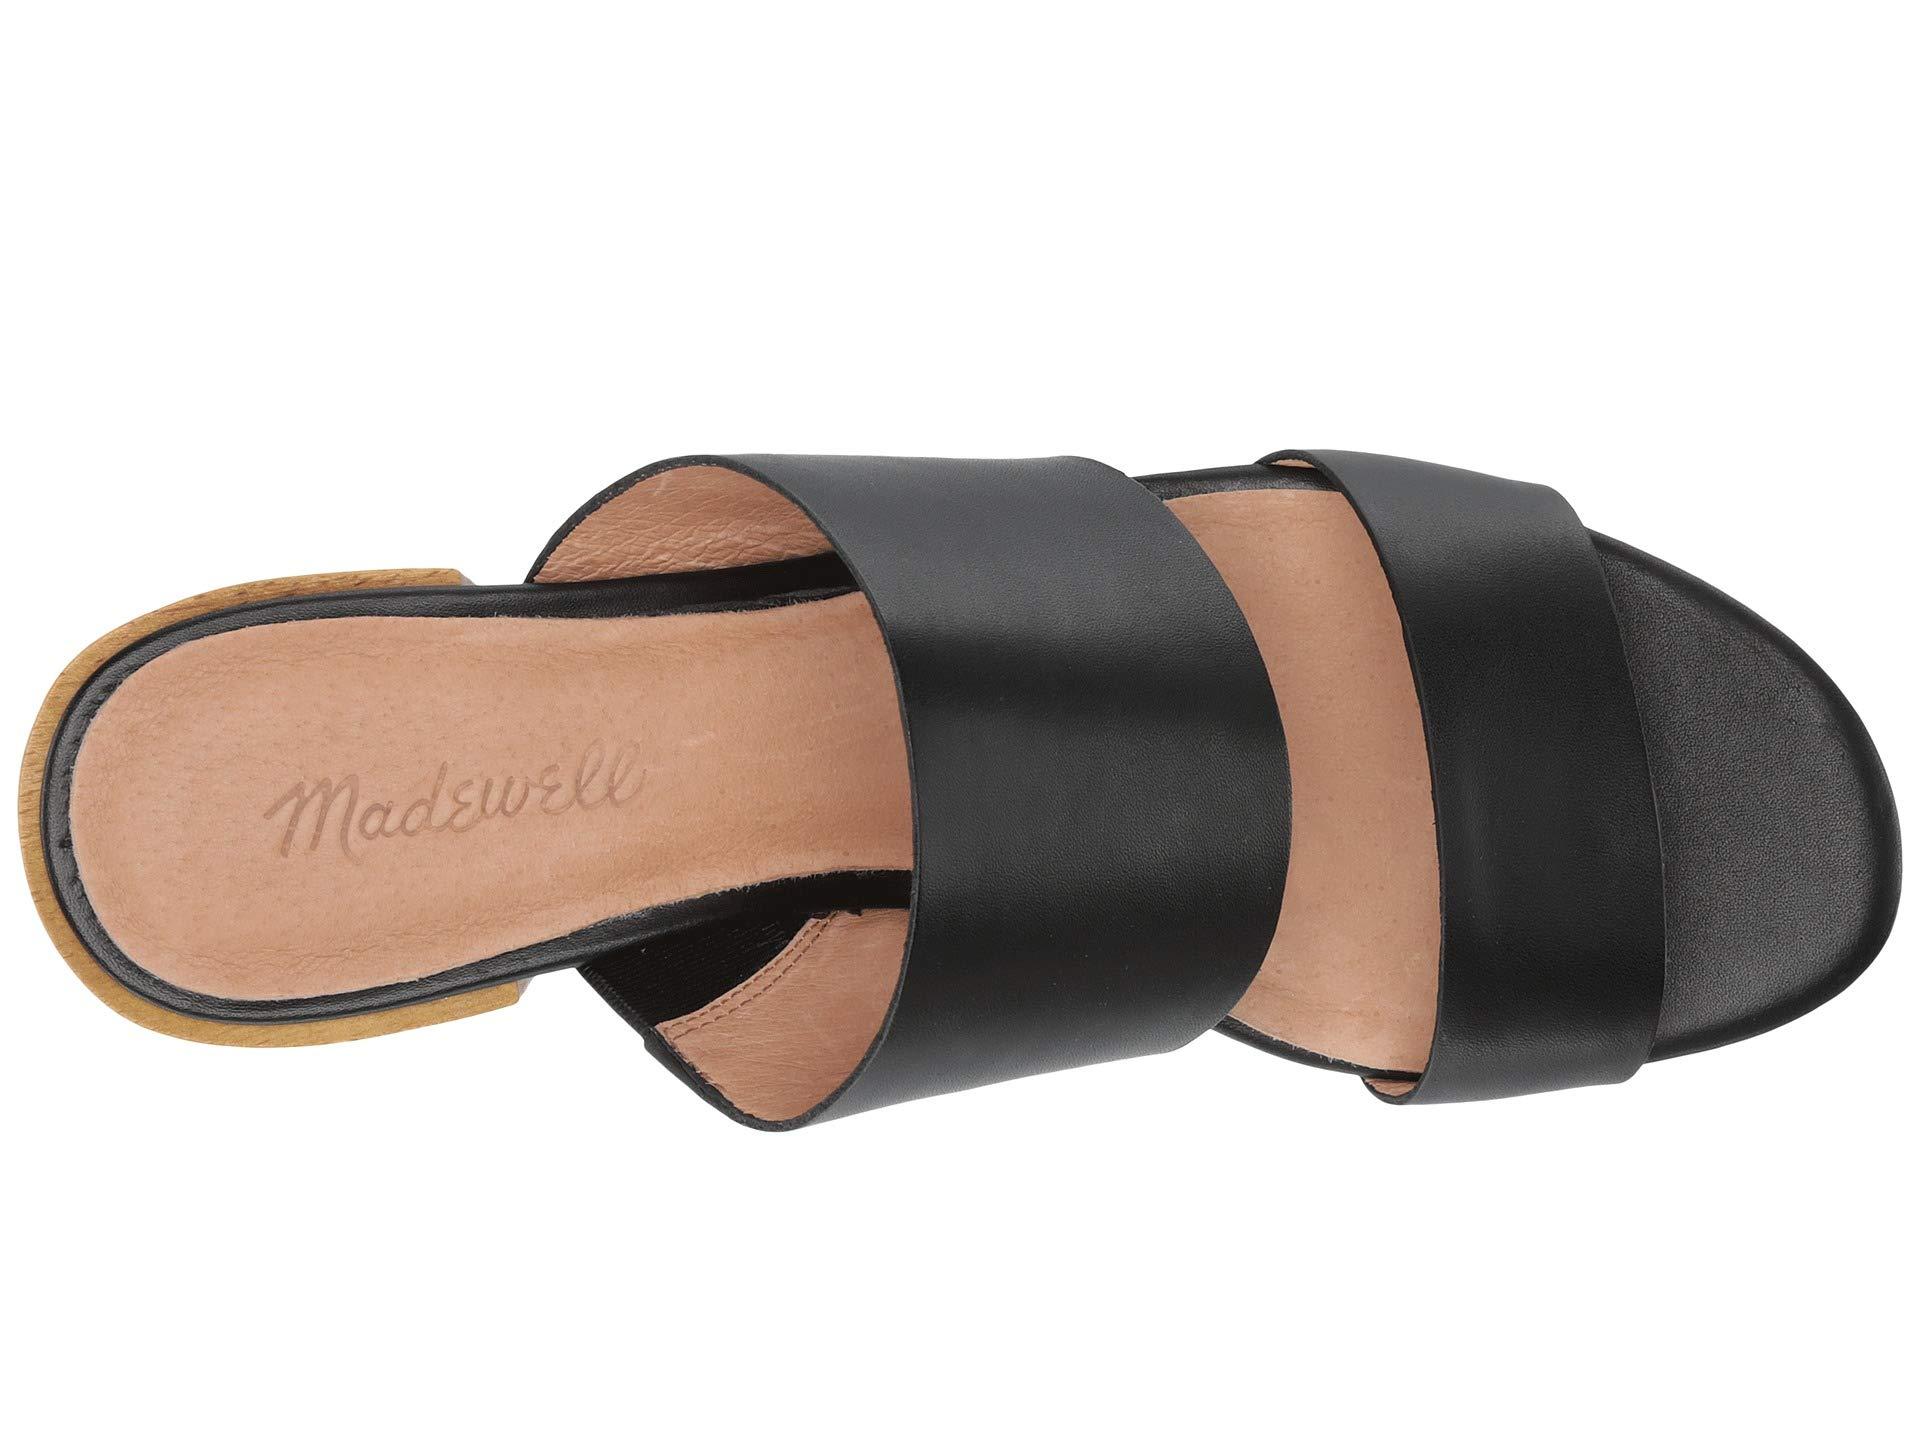 Madewell Leather The Kiera Mule Sandals in Black - Lyst